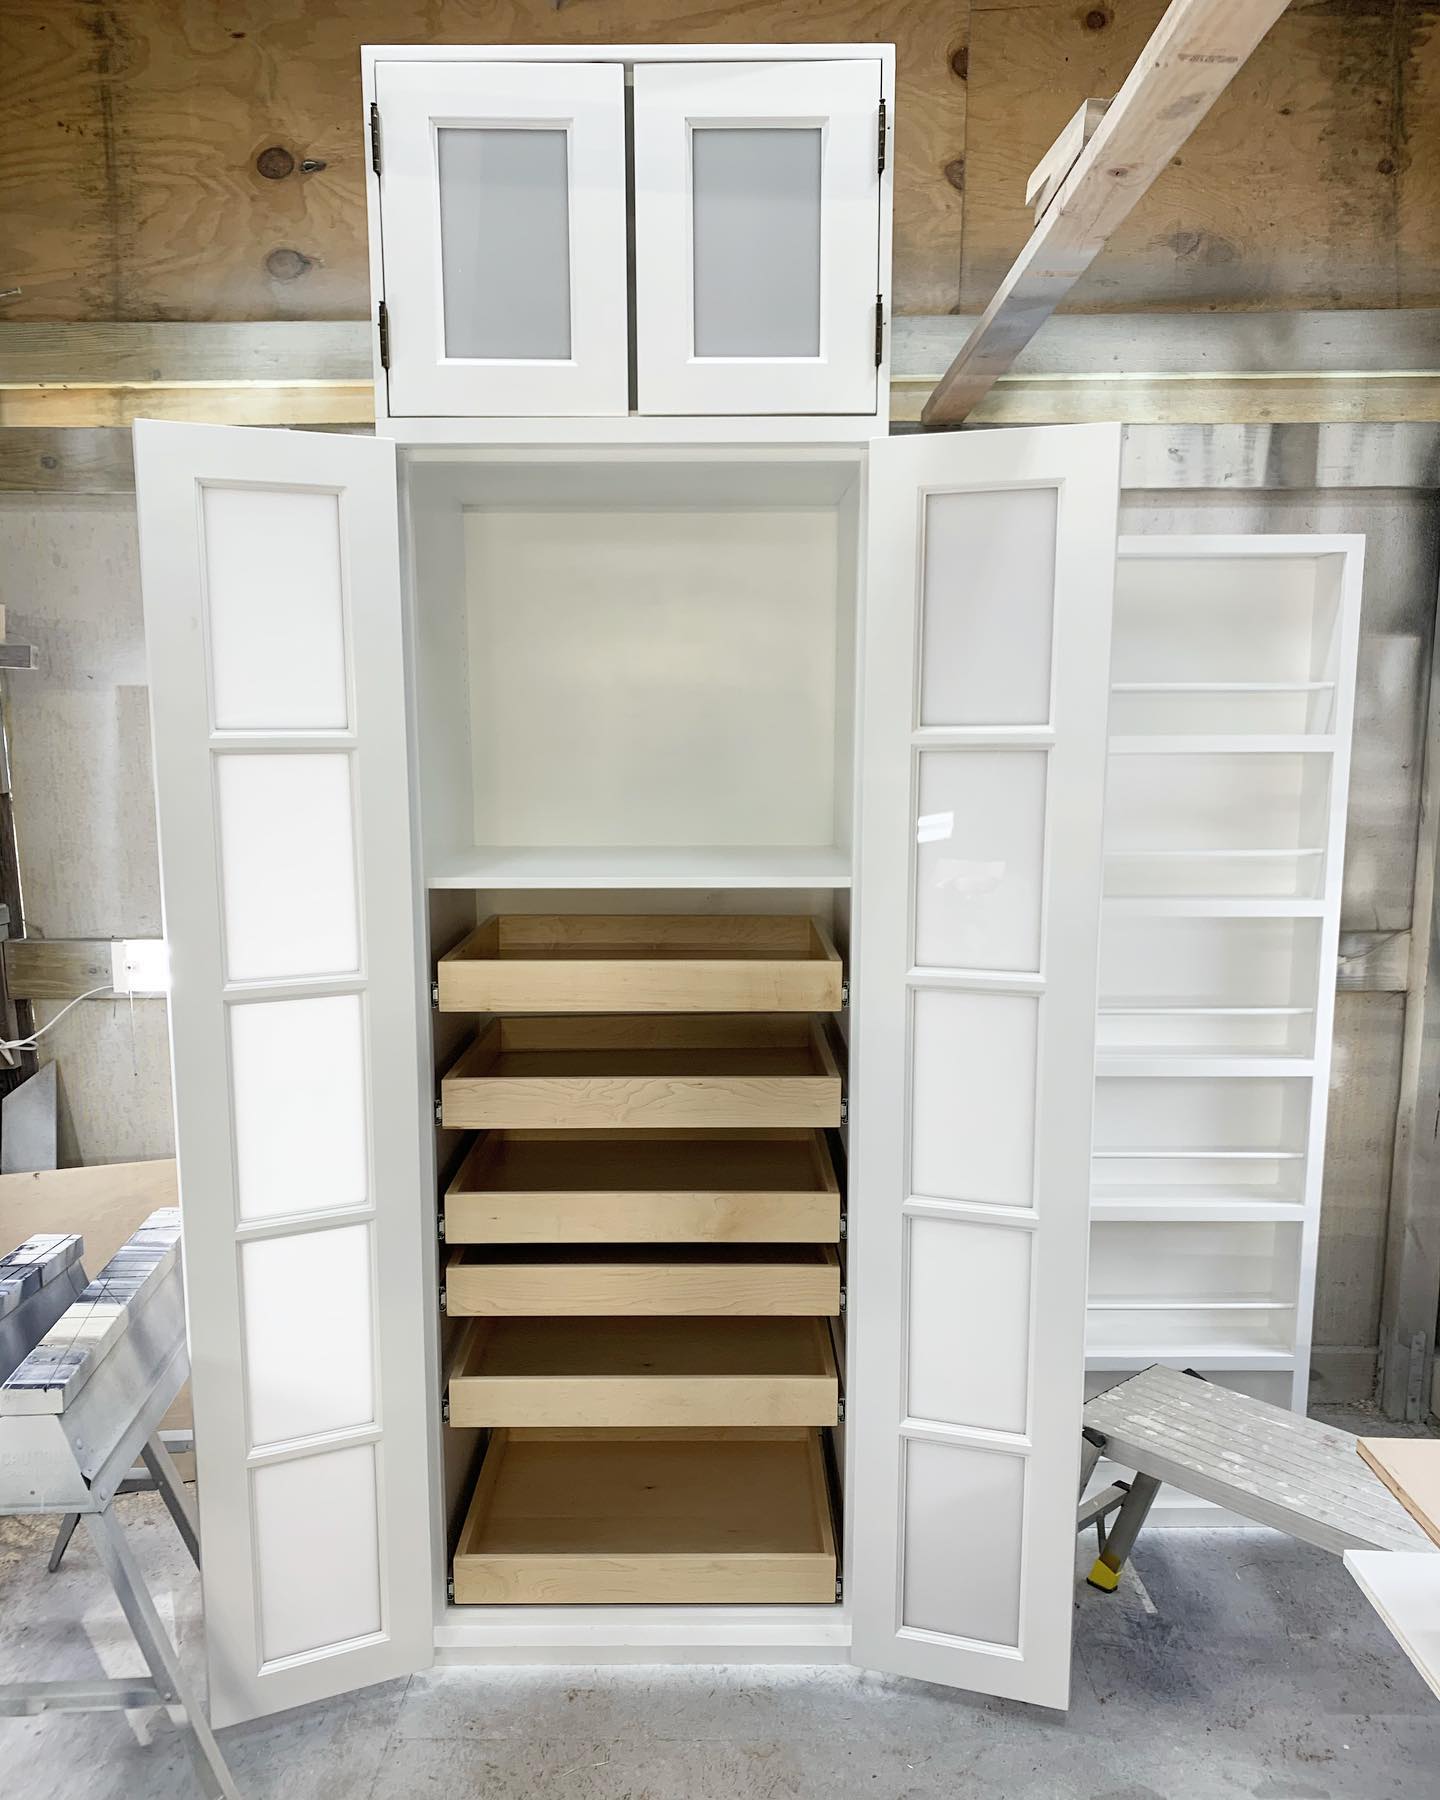 Pantry assembled but not installed